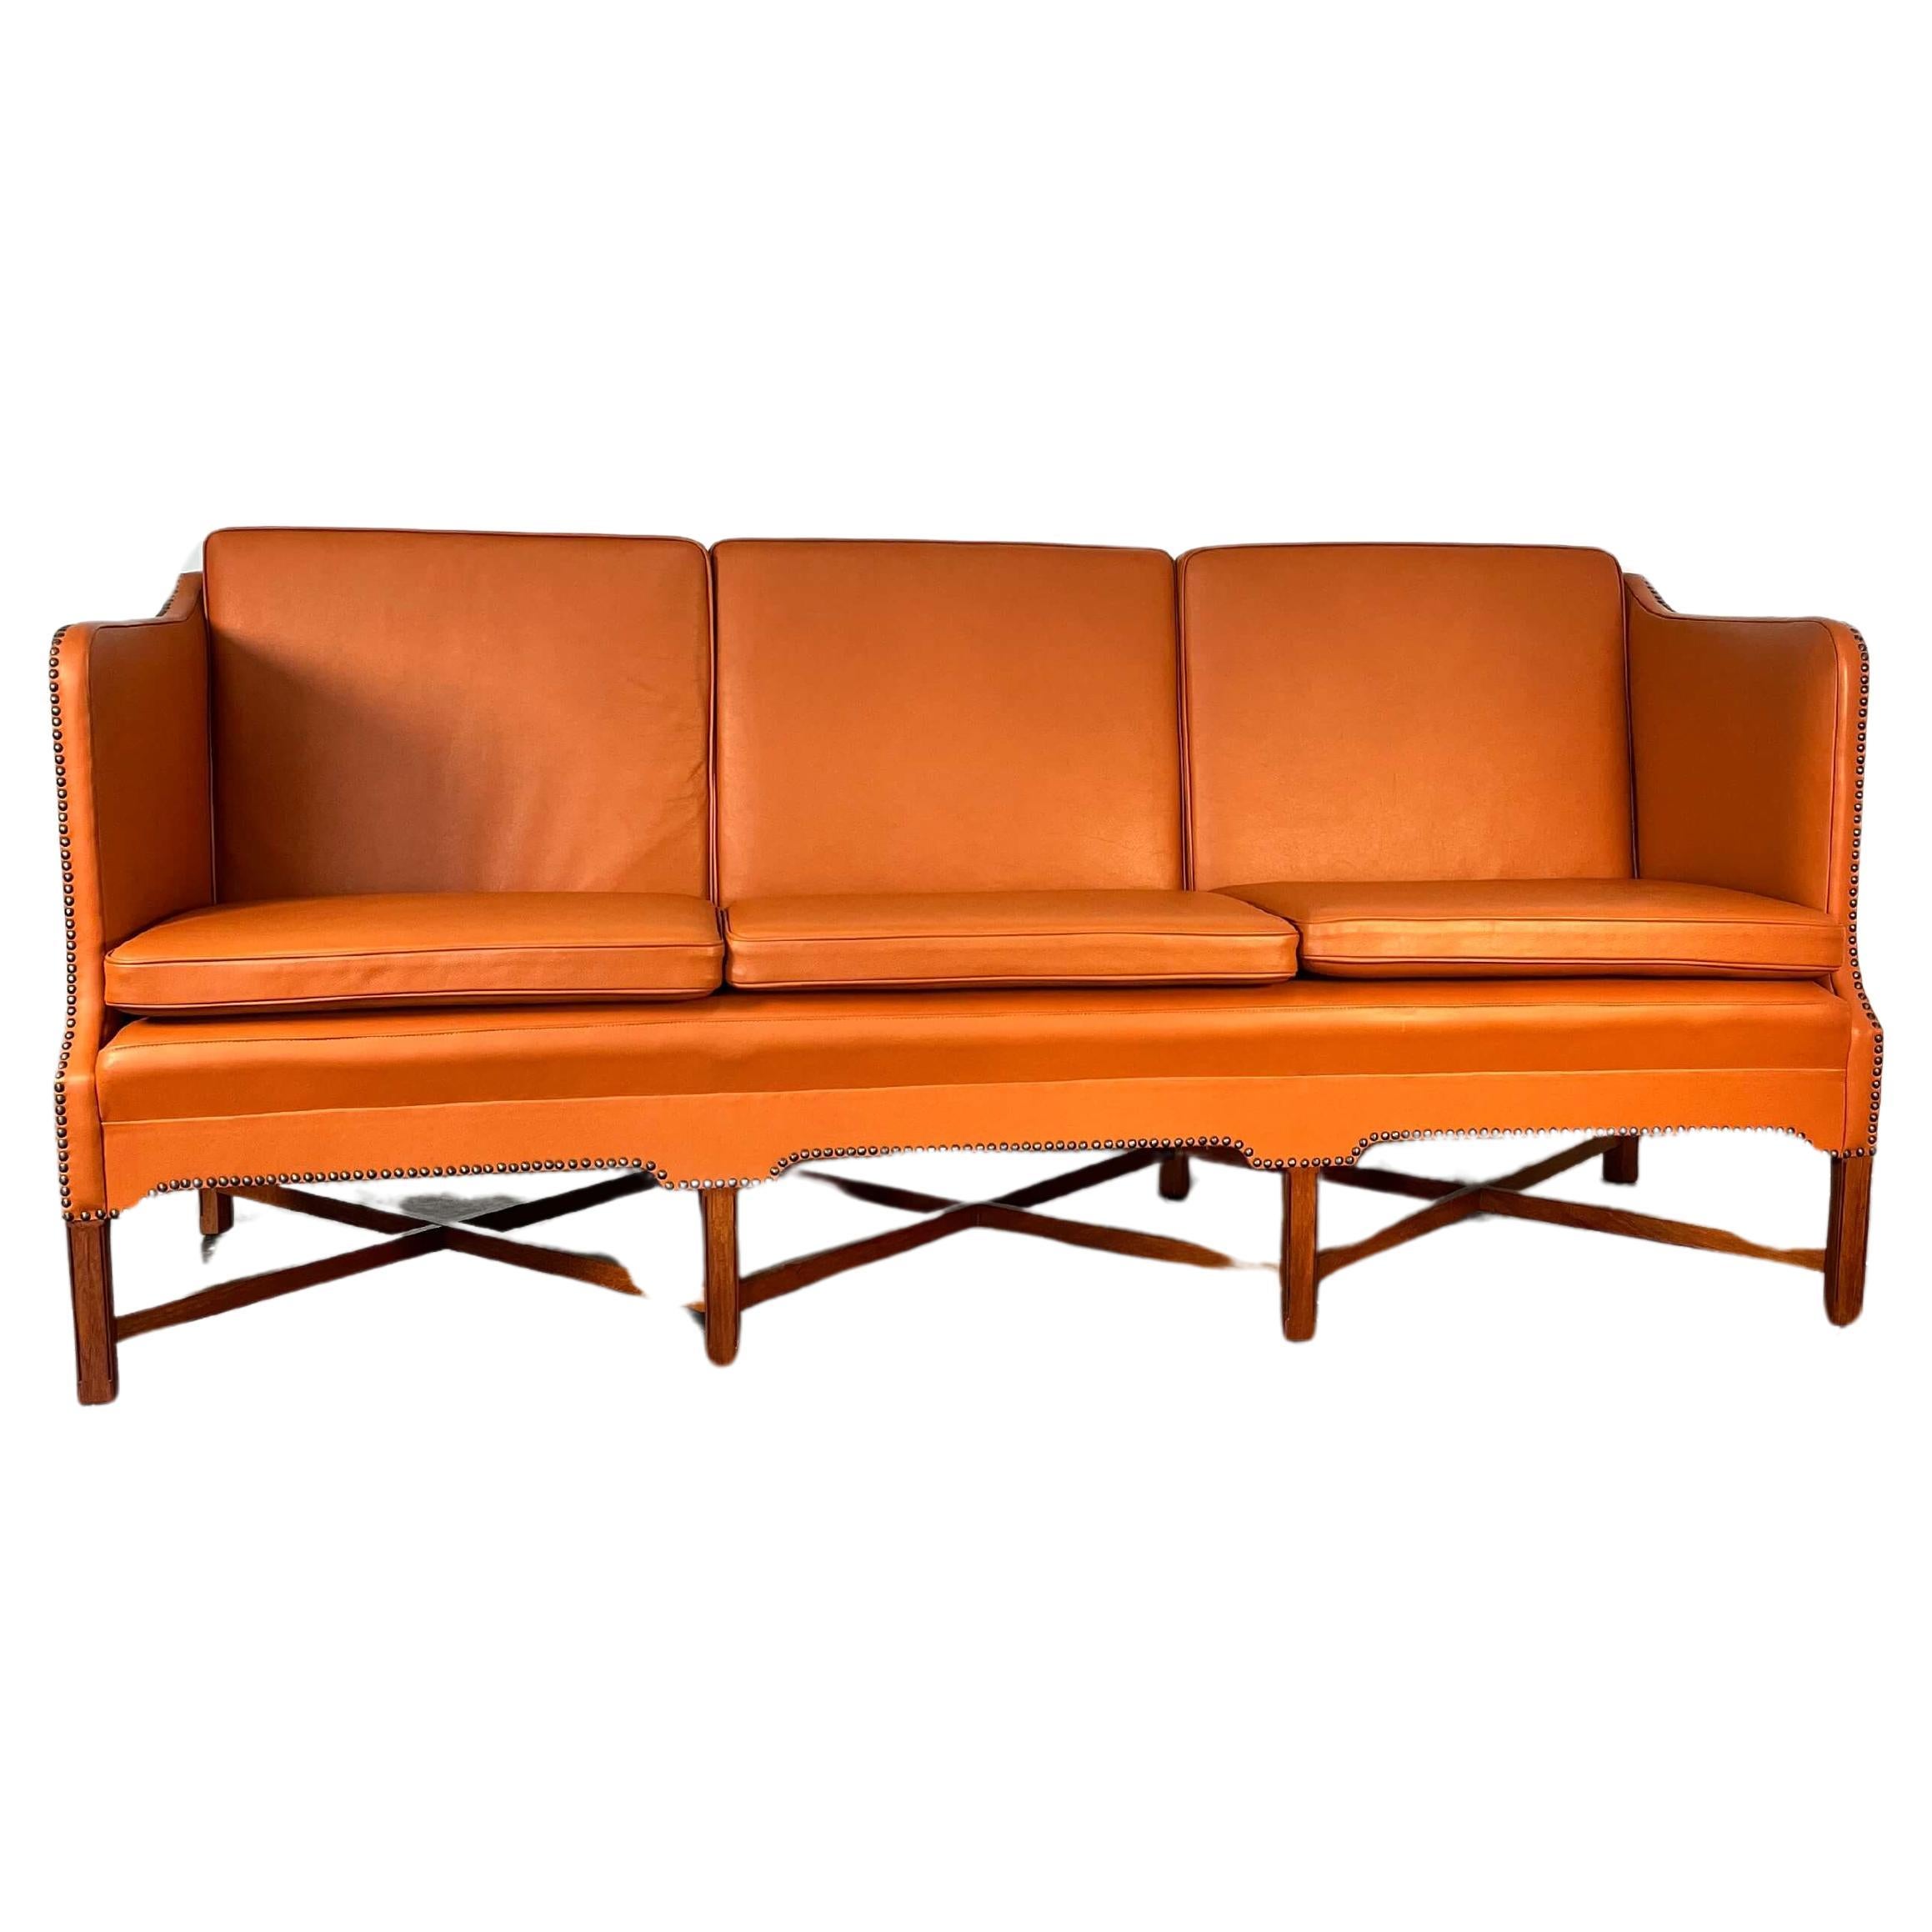 Kaare Klint for Rud.Rasmussen, sofa #4118, made with leather and mahogany, Denmark. Designed in 1930's, we cant pinpoint the exact production date of this sofa.

Kaare Klint originally designed the present three-seat sofa, known as 4118, for the